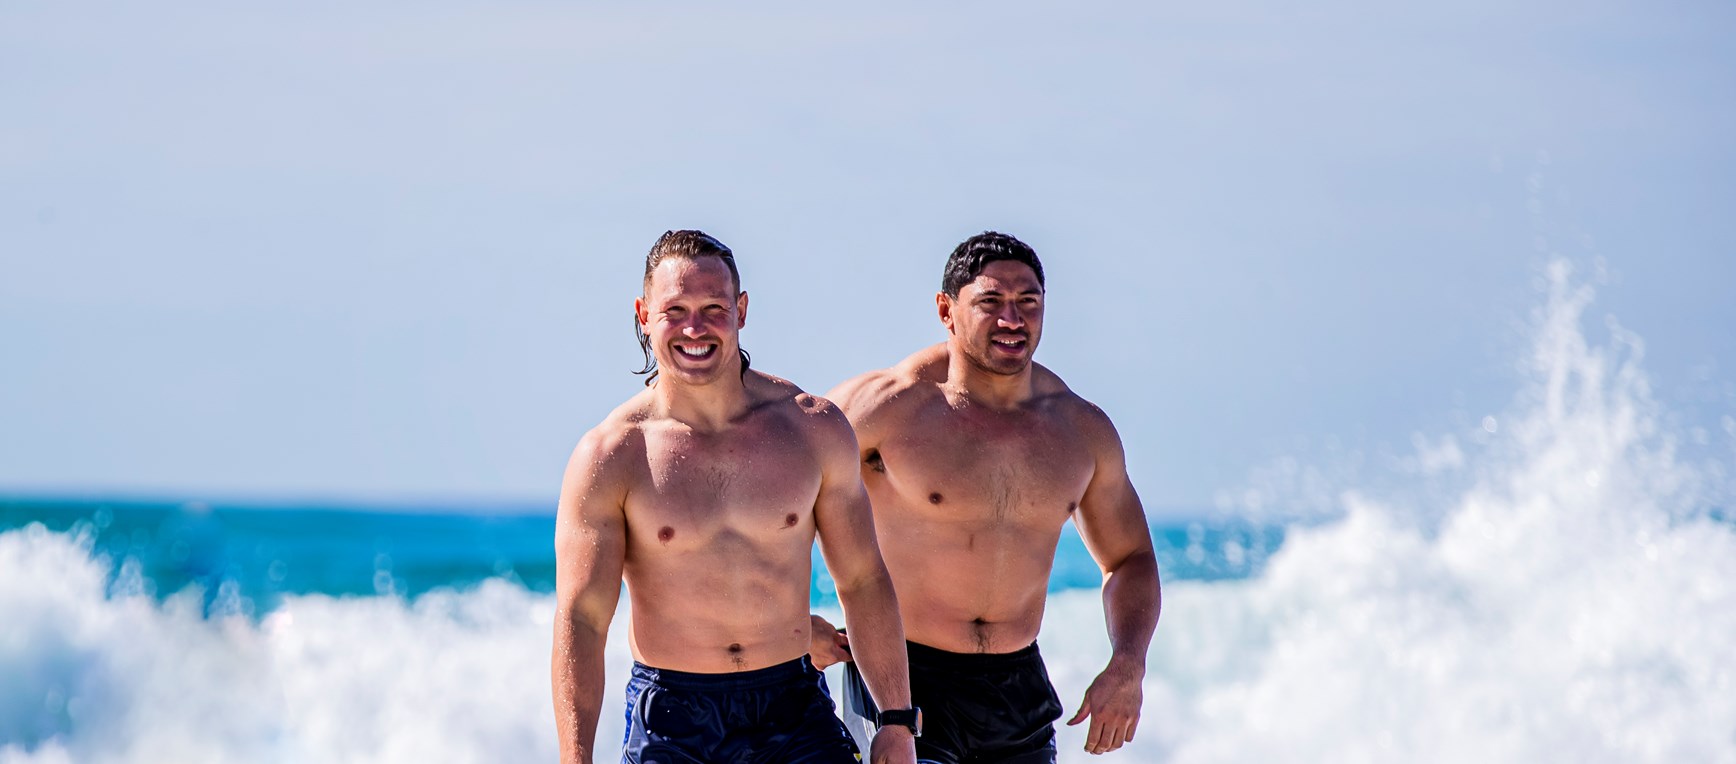 Gallery: Cowboys recovery session at Broadbeach